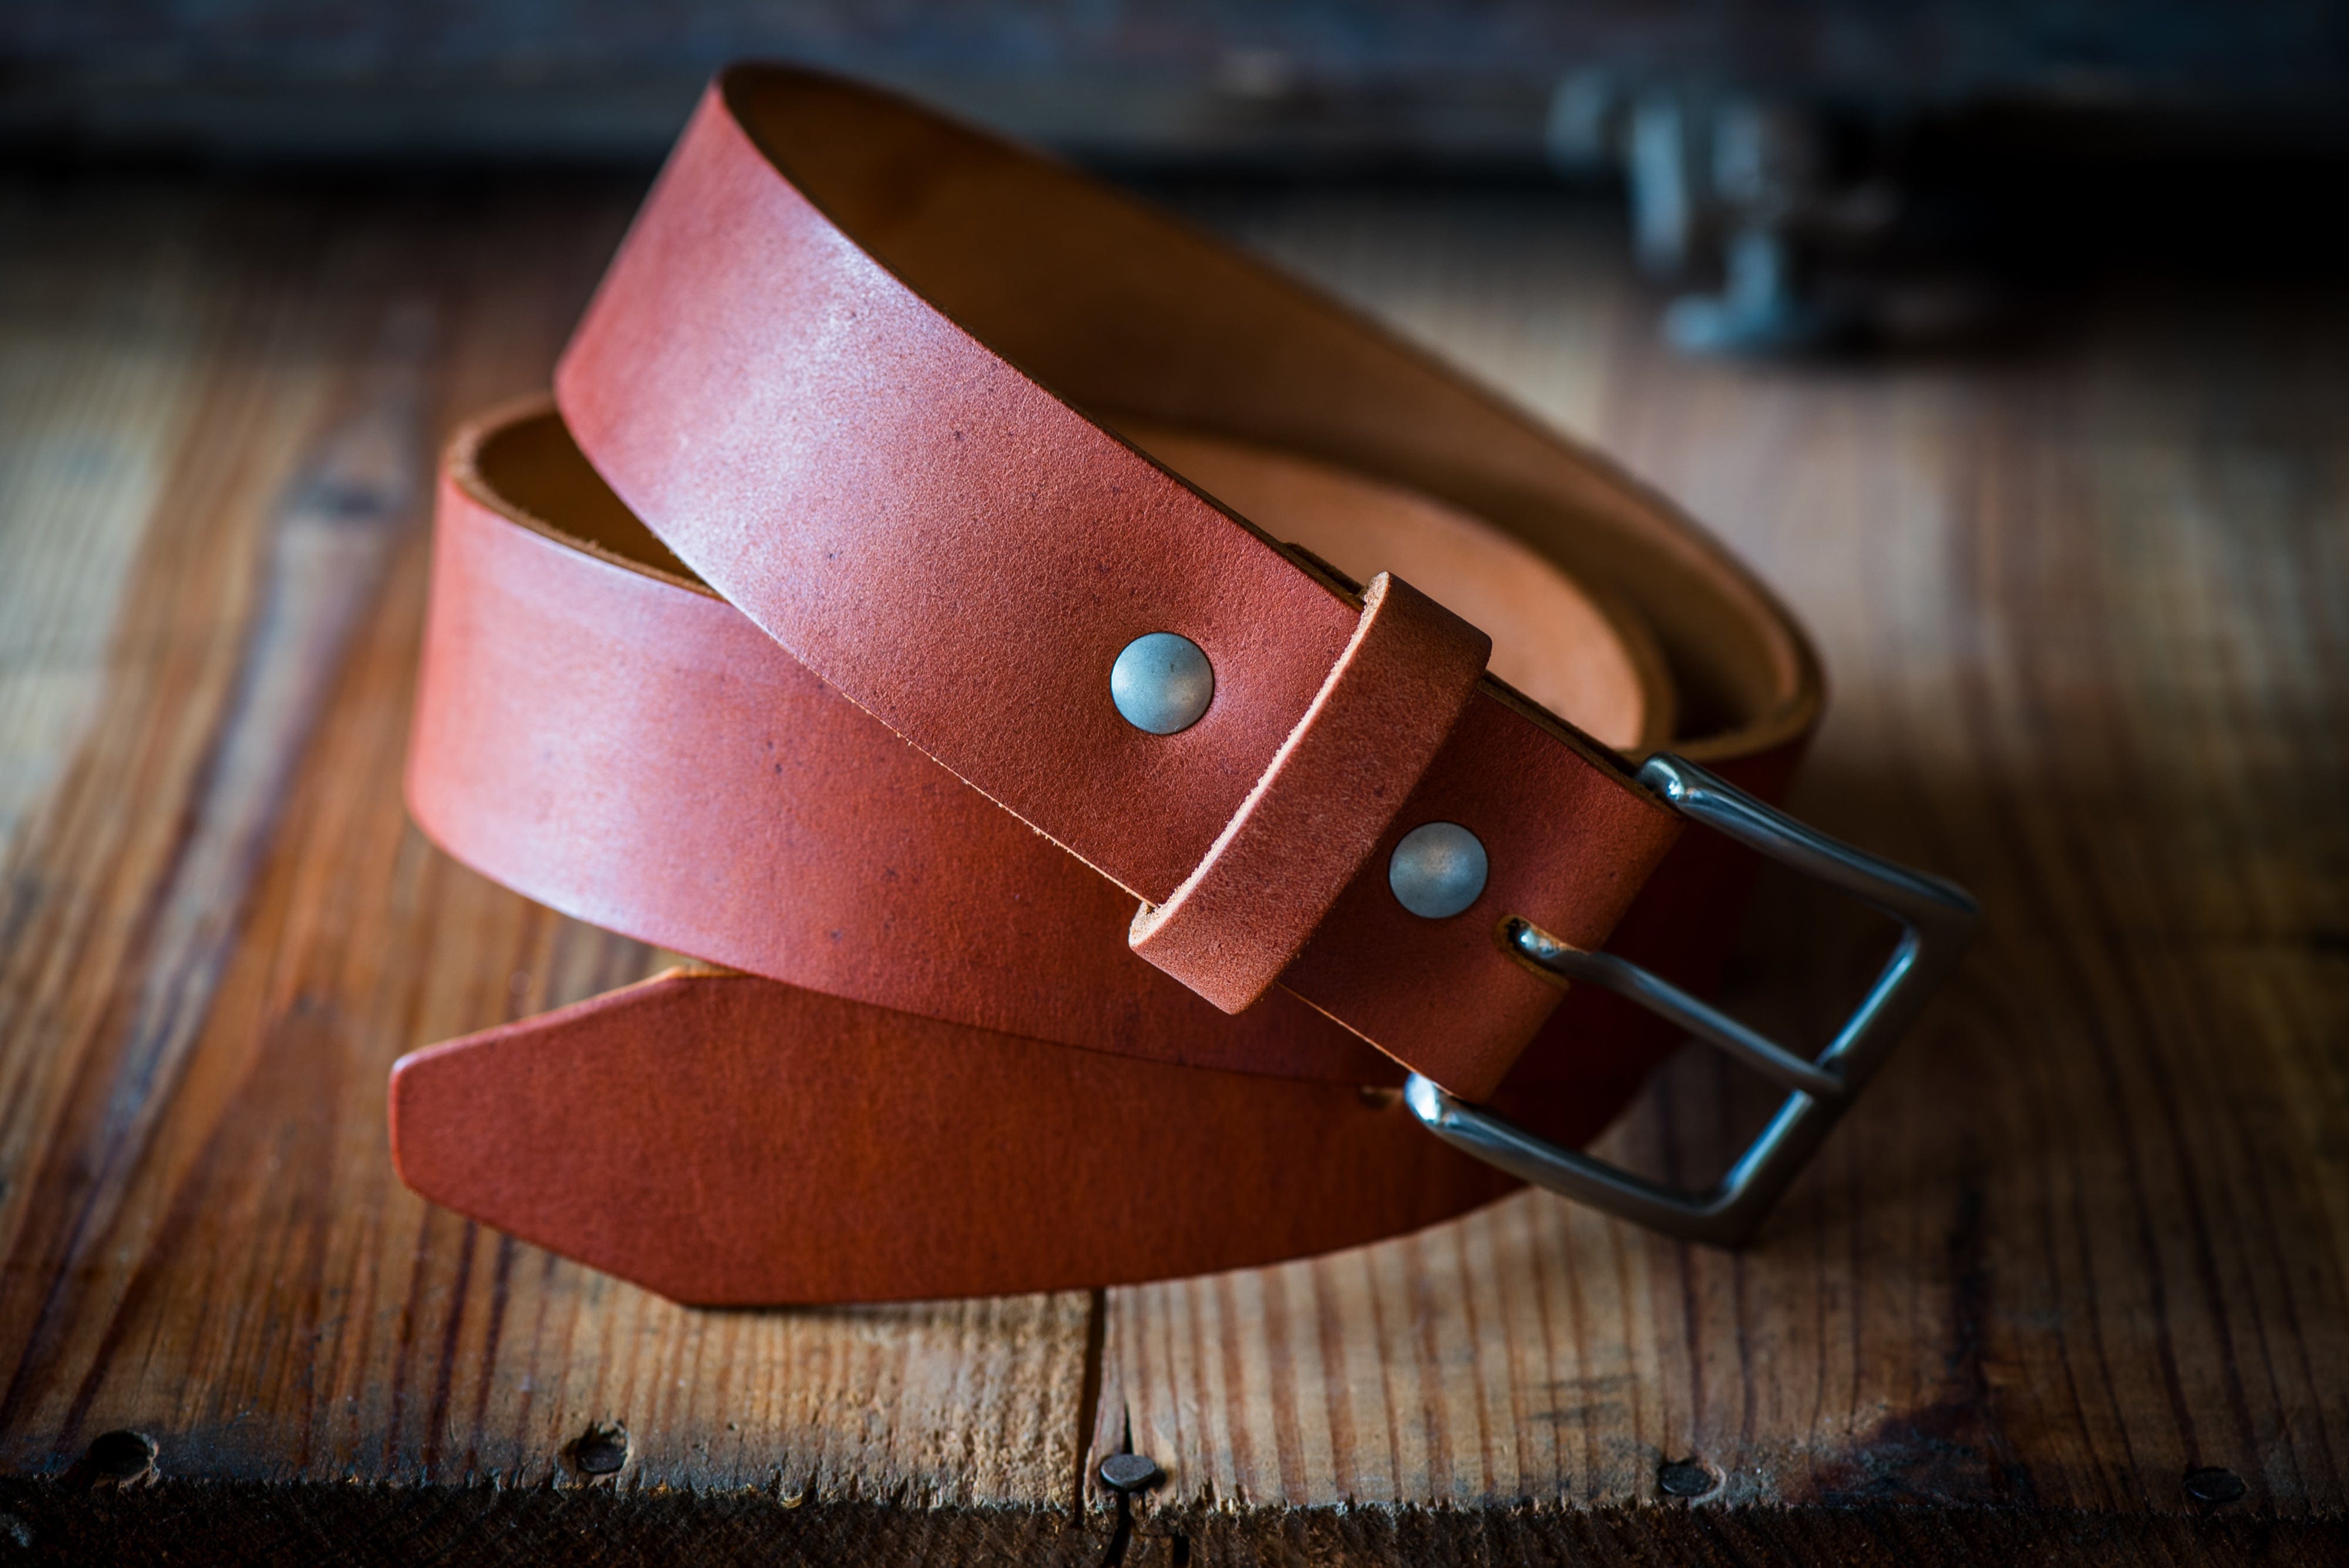 American Made Leather Belt (Brown)